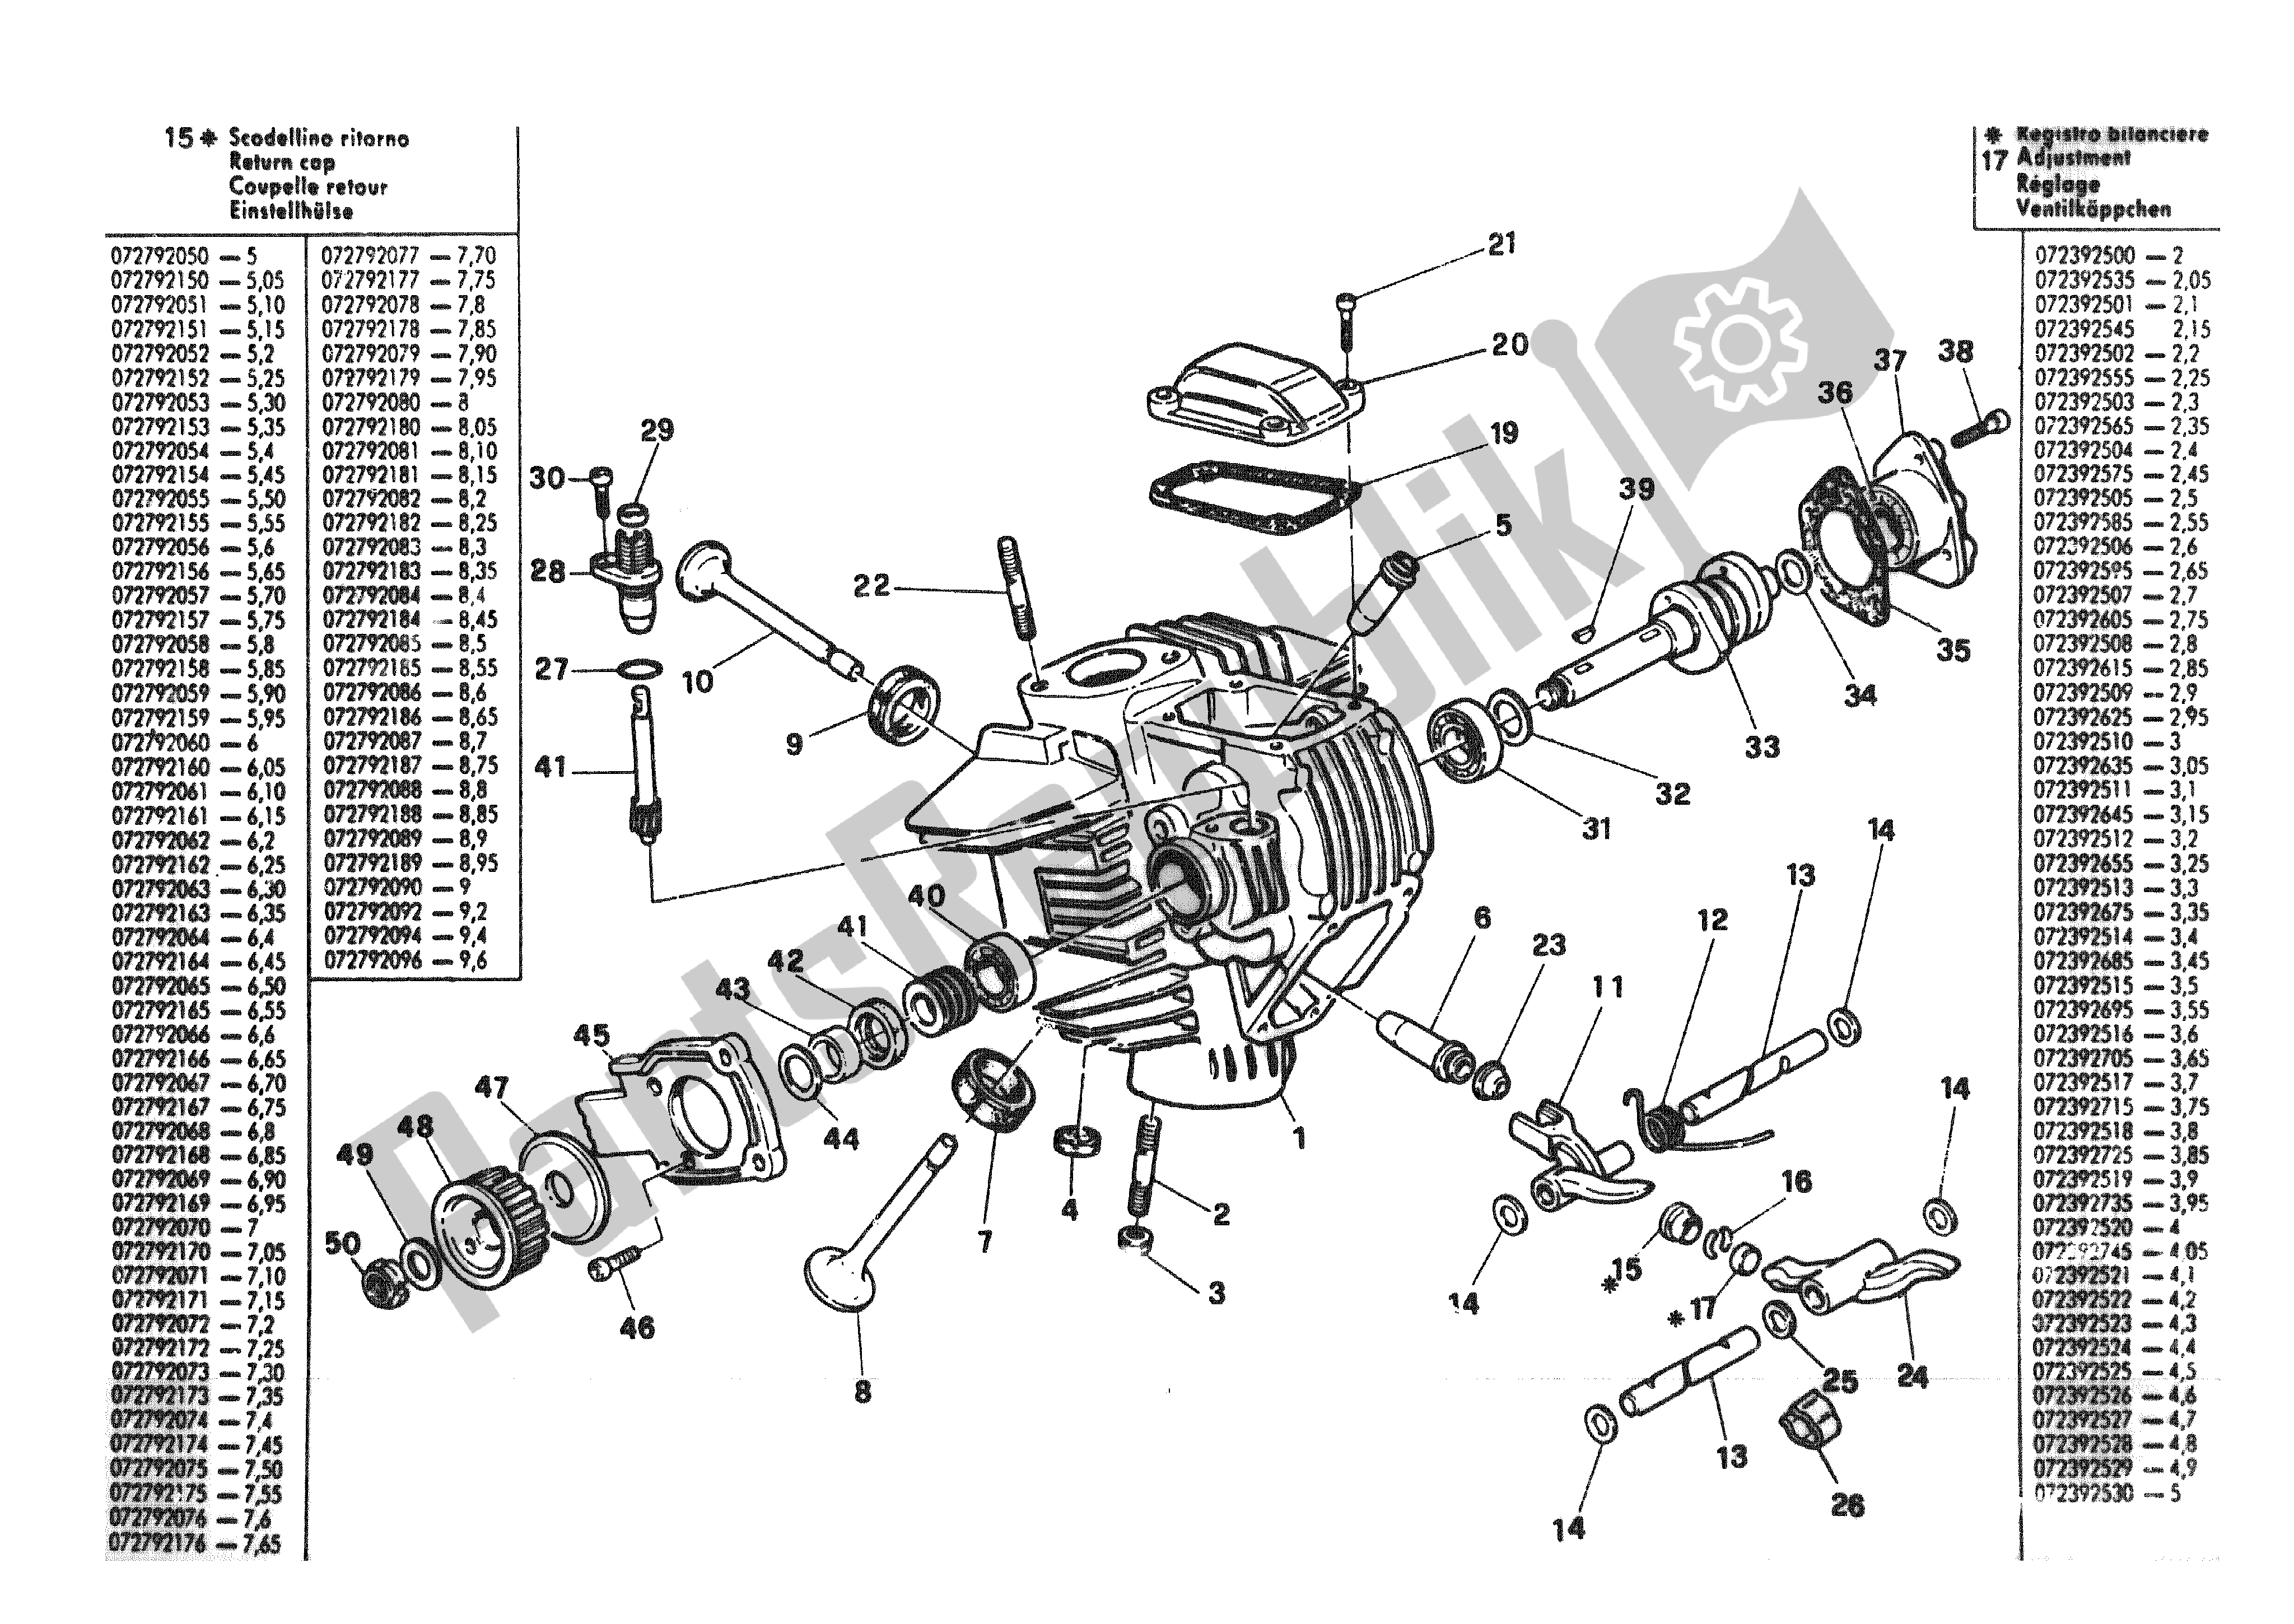 All parts for the Horizontal Head of the Ducati 750 Sport 1988